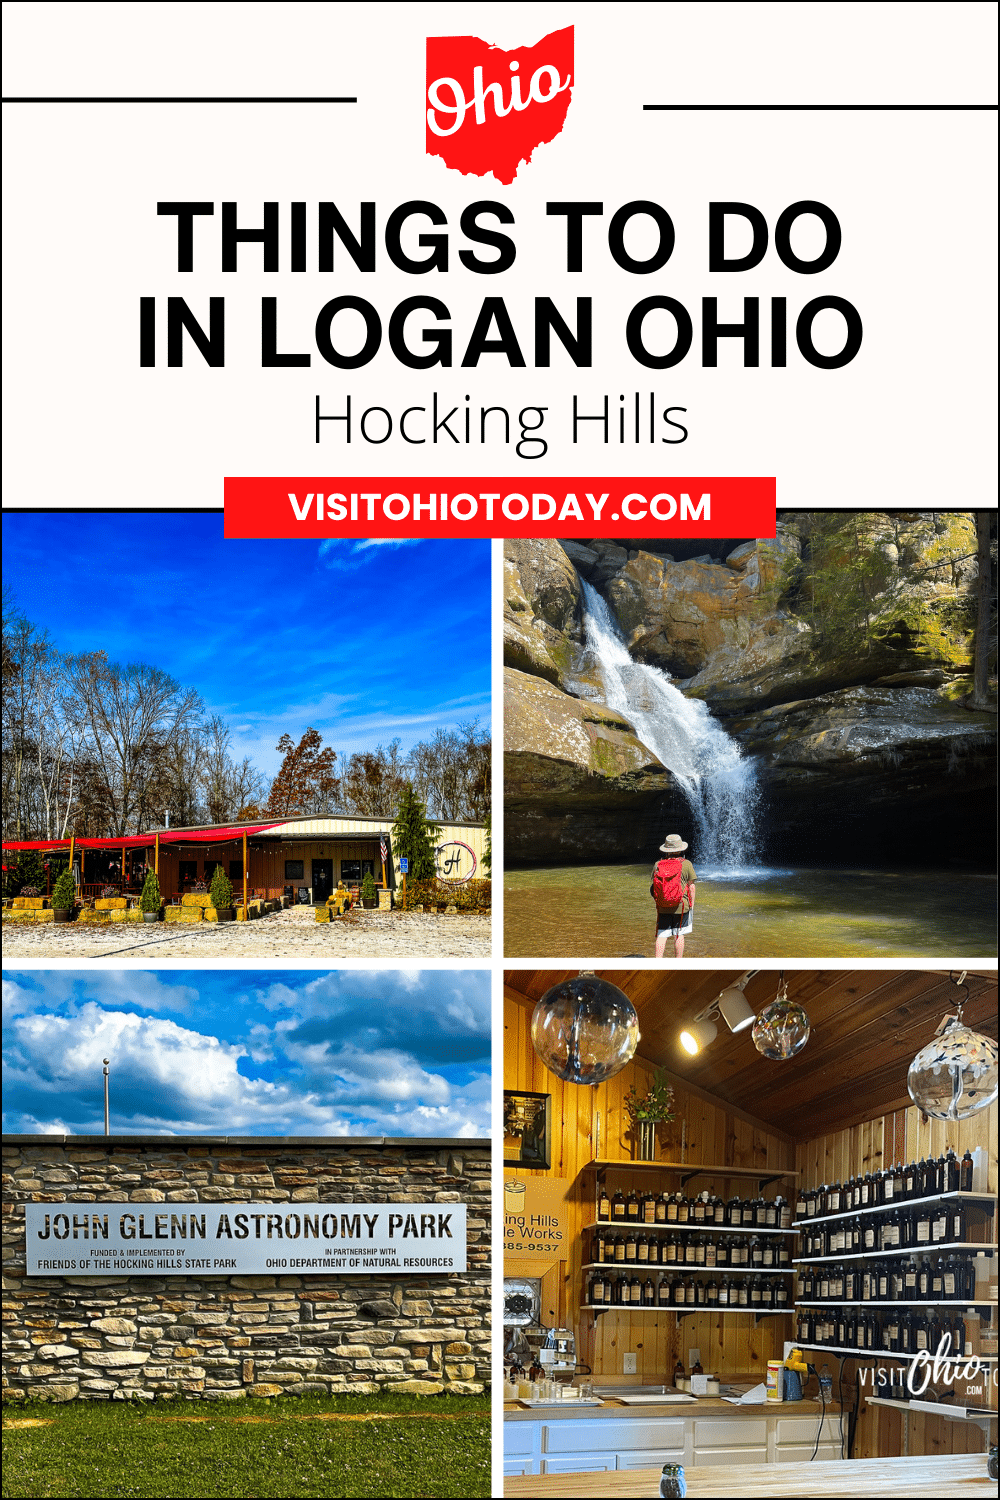 vertical image for Pinterest with 4 photos of places in Logan: Hocking Hills Winery, Conkles Hollow, John Glenn Astronomy Park, and Hocking Hills Candle Works. A white strip across the top has the text Things to Do in Logan Ohio Hocking Hills